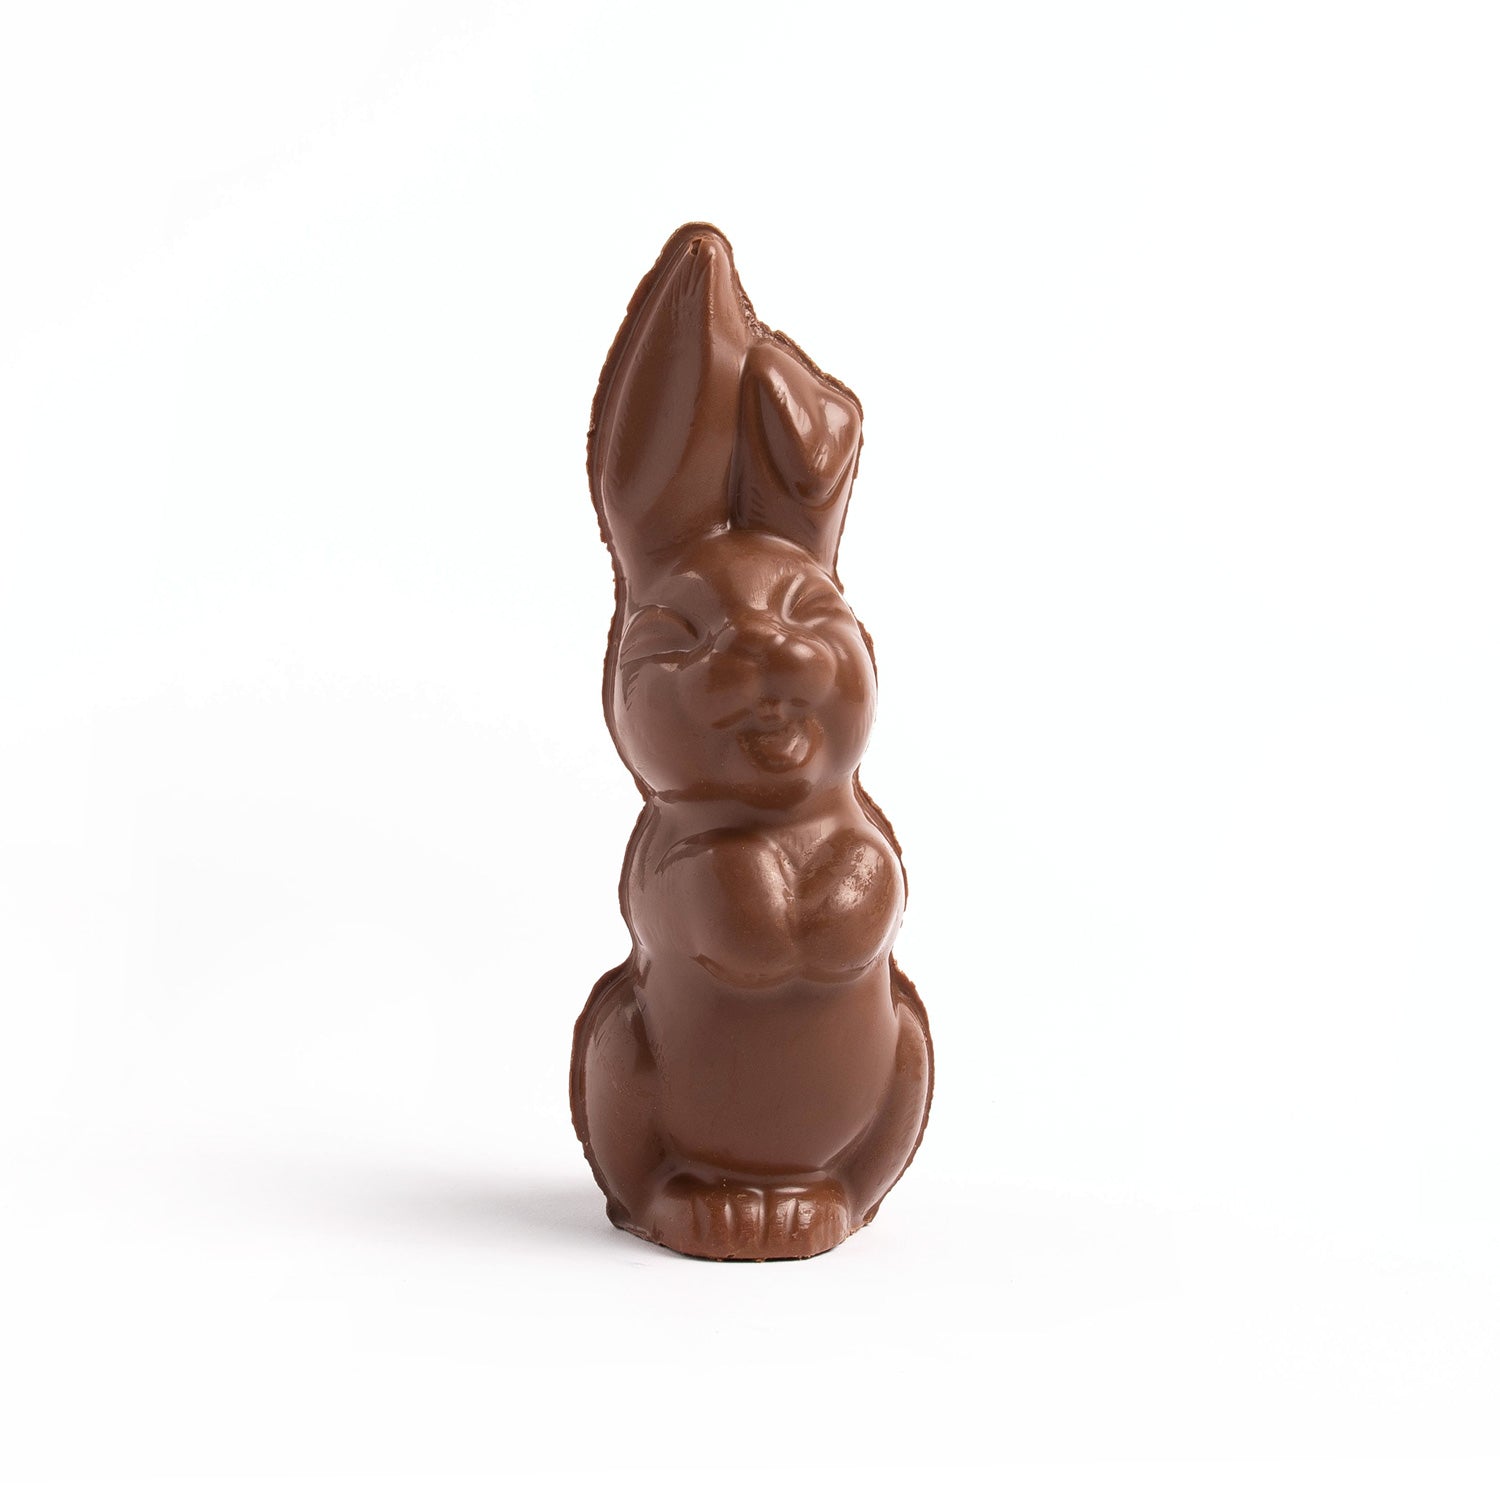 A molding of a milk chocolate laughing bunny